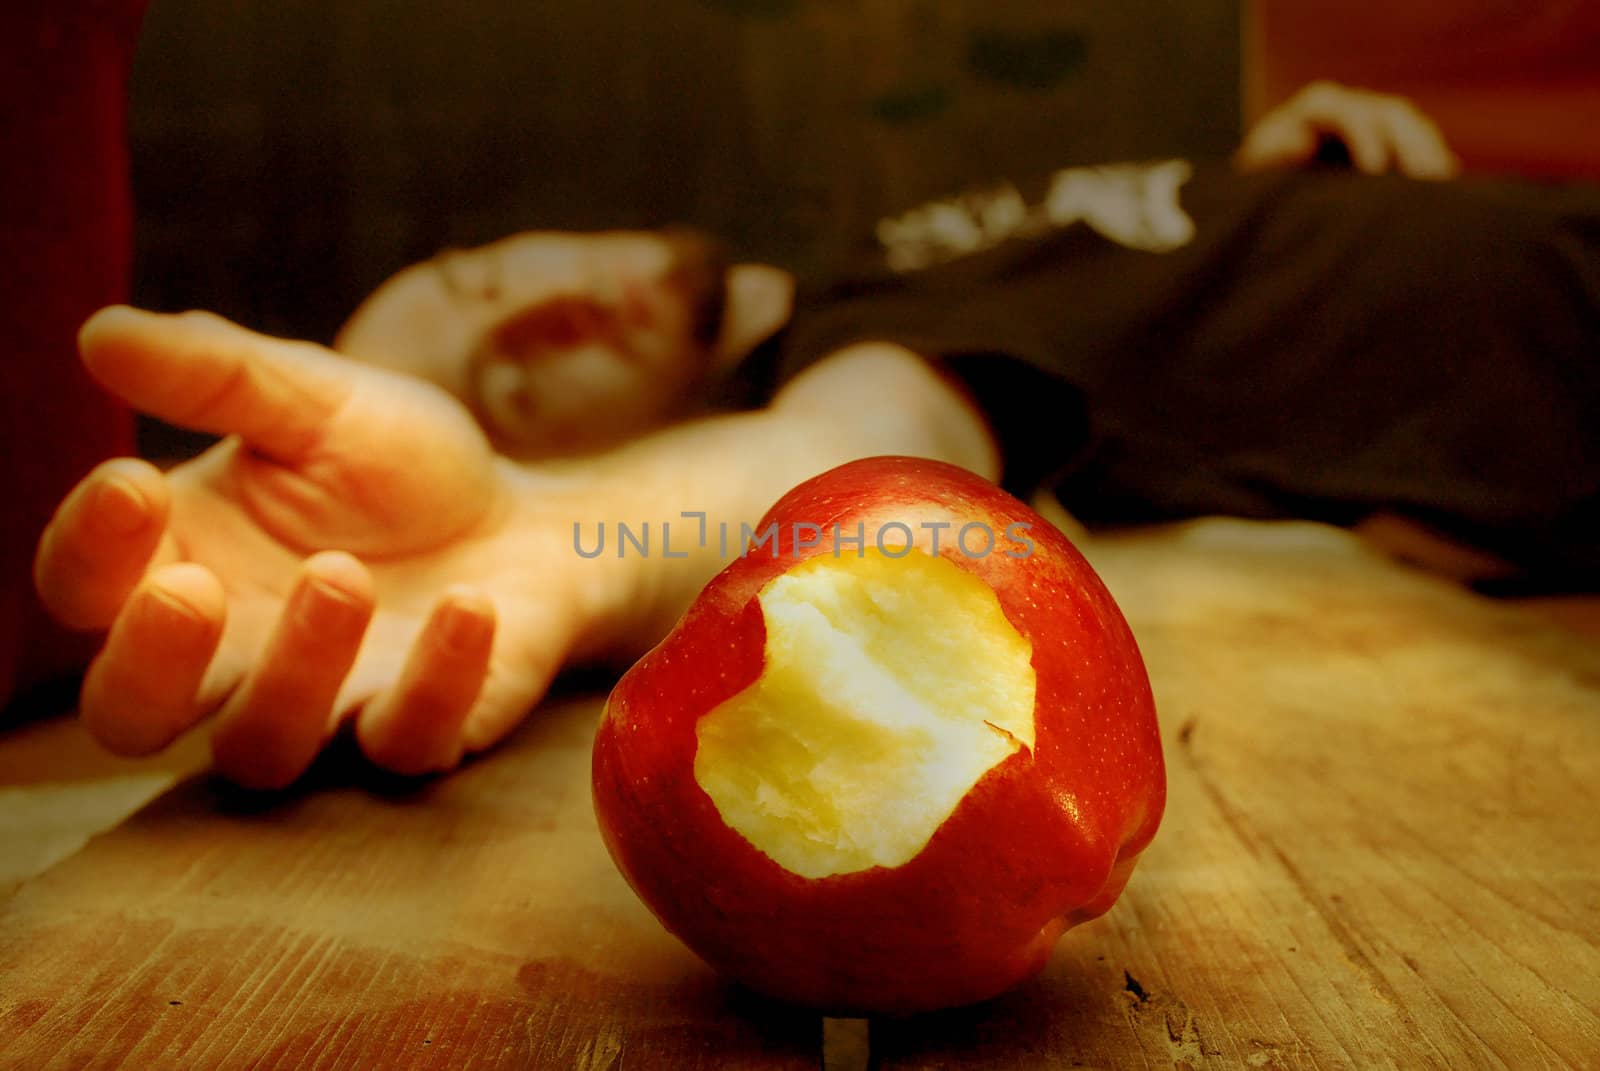 a young man killed by eating a poisonous red apple